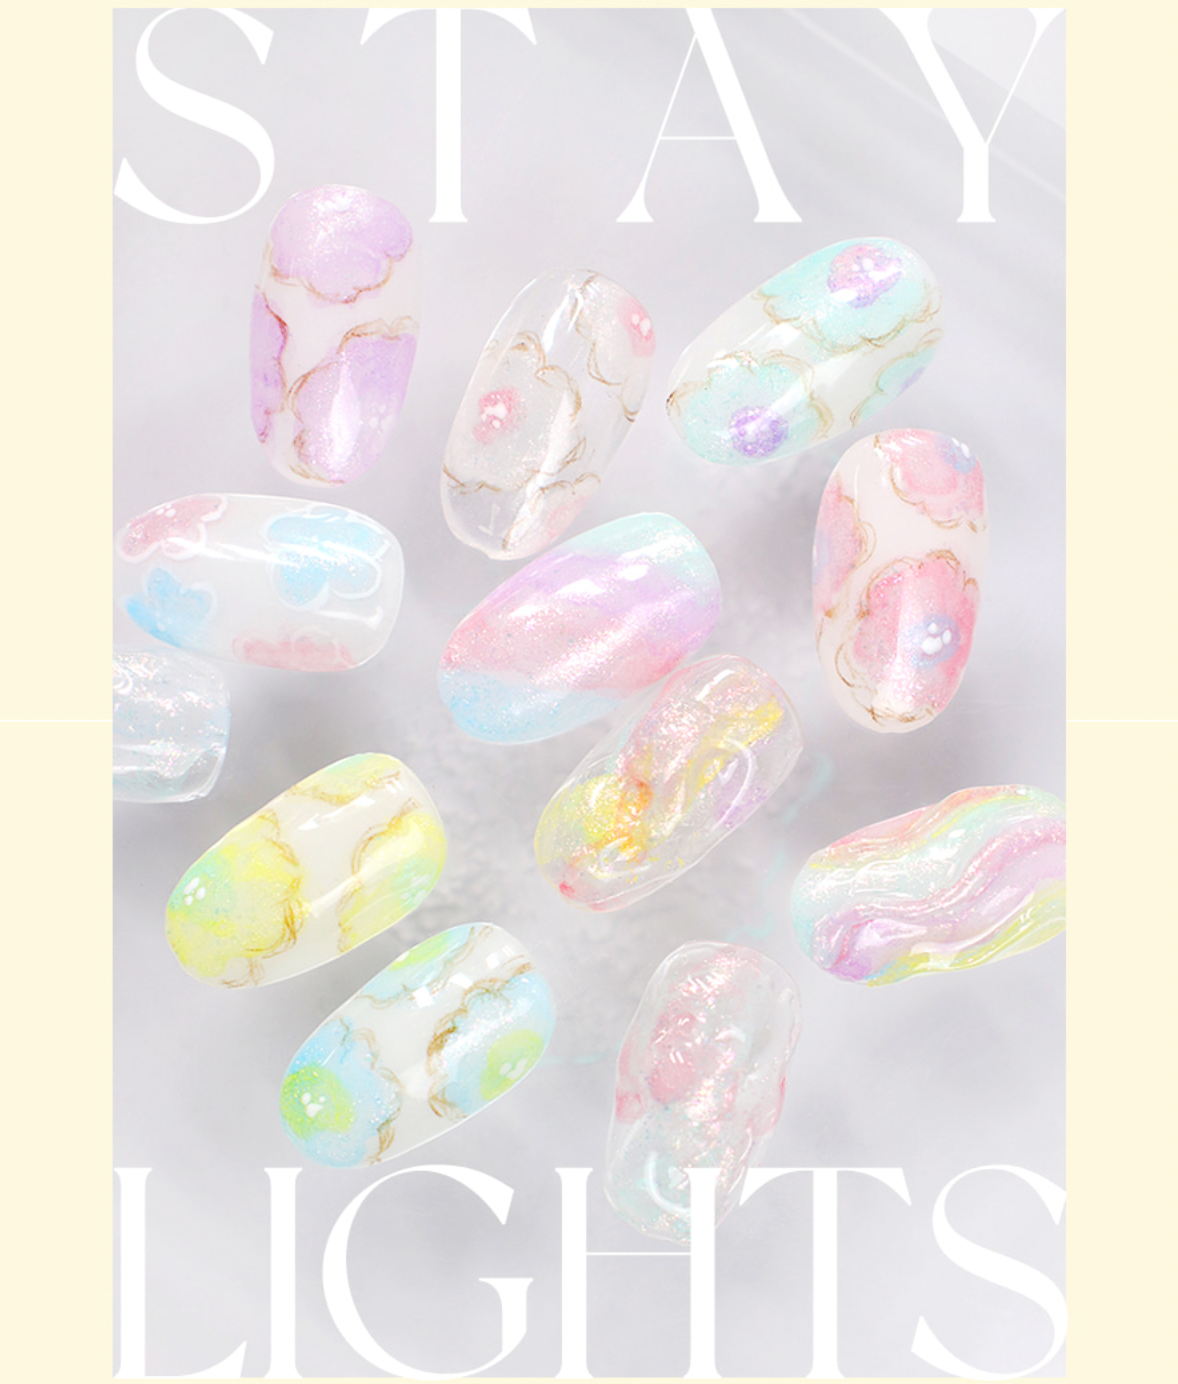 MAKE.N STAY LIGHTS - Pearl Tint ink collection